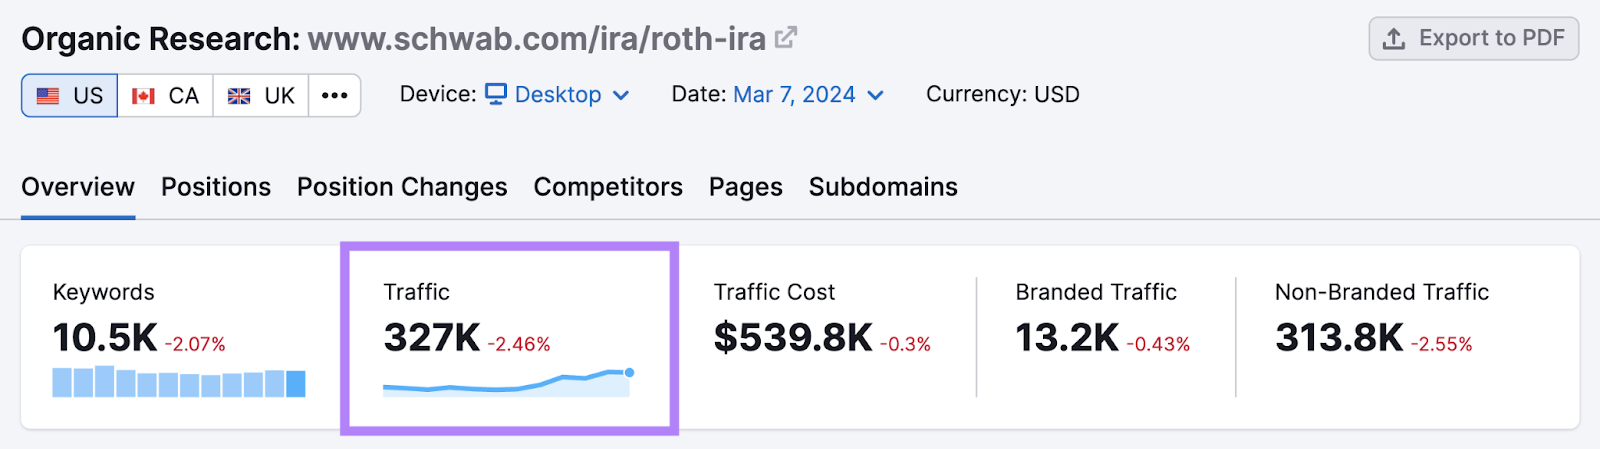 Charles Schwab's landing leafage   targeting the keyword “Roth IRA" gets astir   327K monthly visitors, according to Organic Research tool